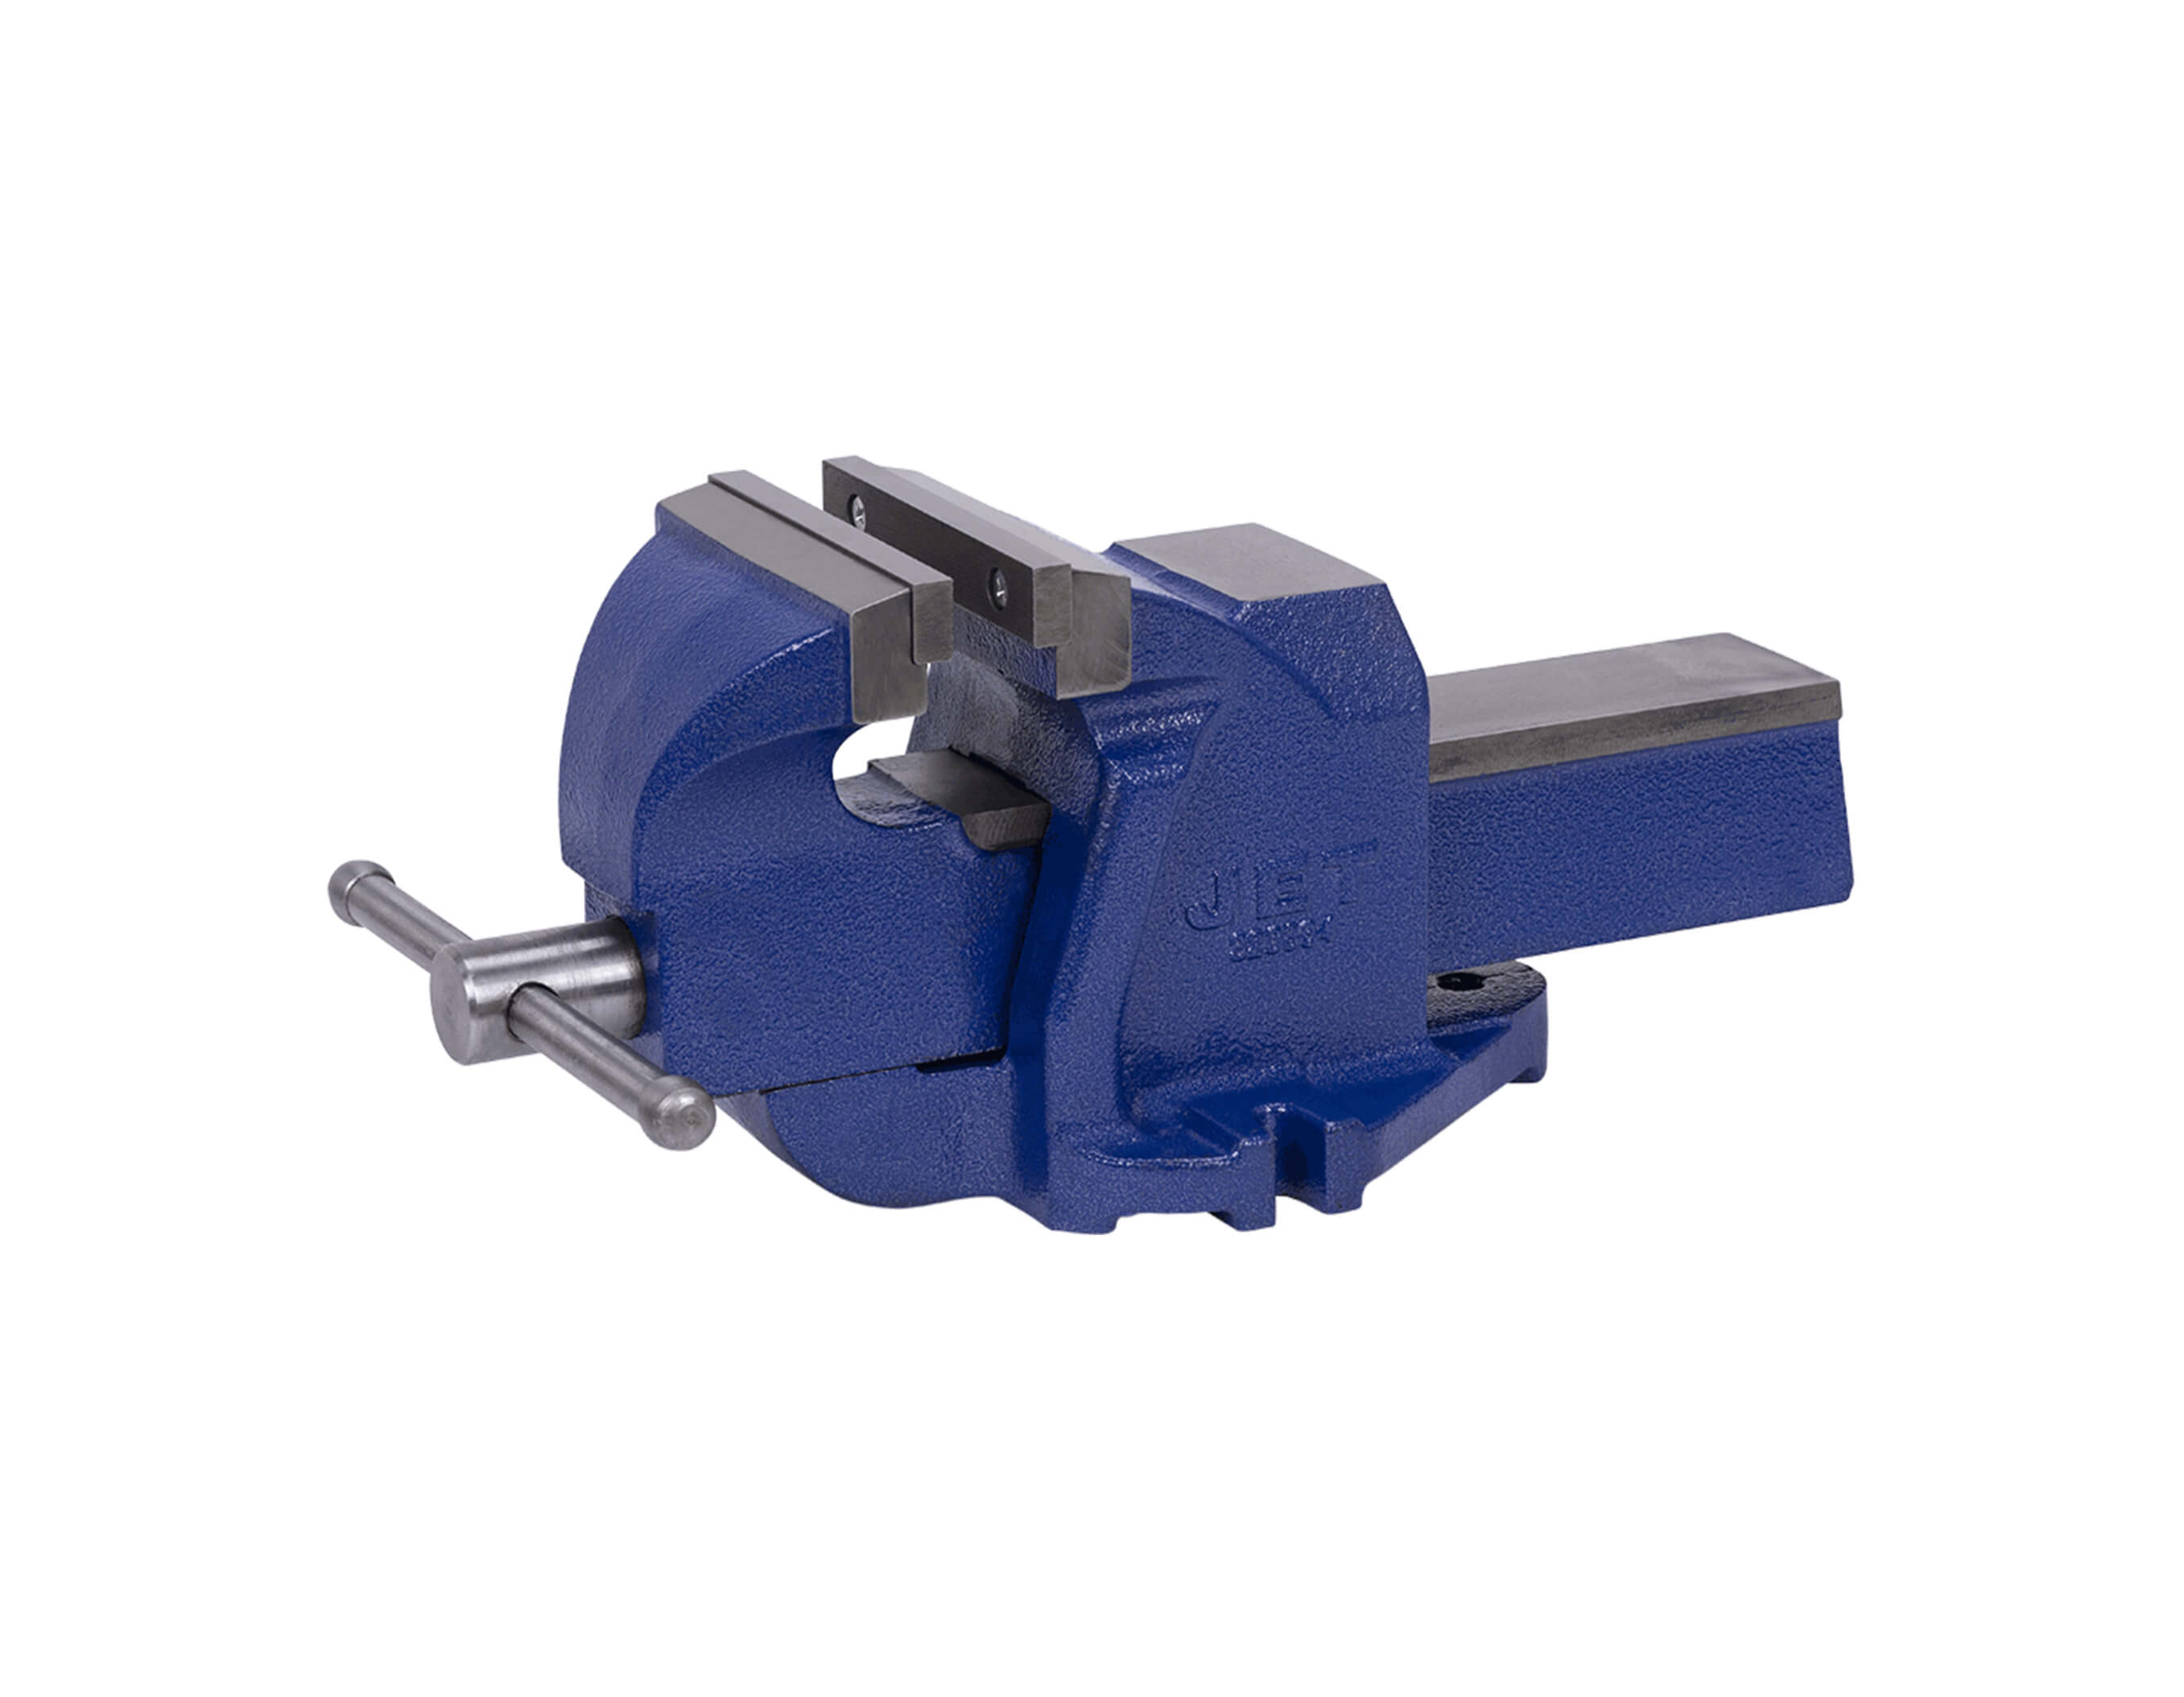 BENCH VISE - 6" JAW WIDTH